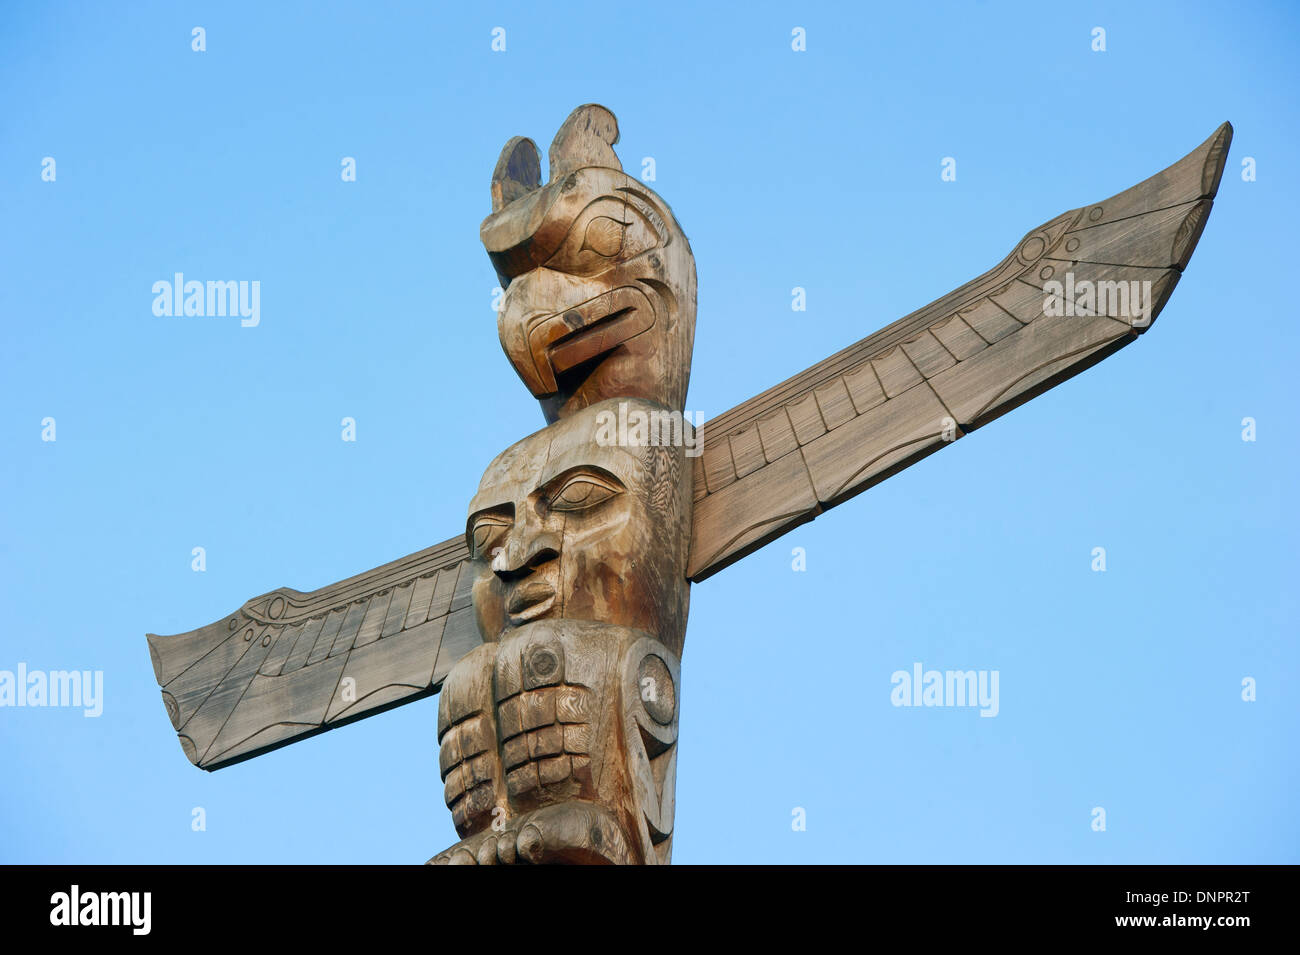 Memorial Totem Pole for Rose Cole Yelton, Squamish tribe, erected 2009, Stanley Park, Vancouver BC, Canada. Stock Photo